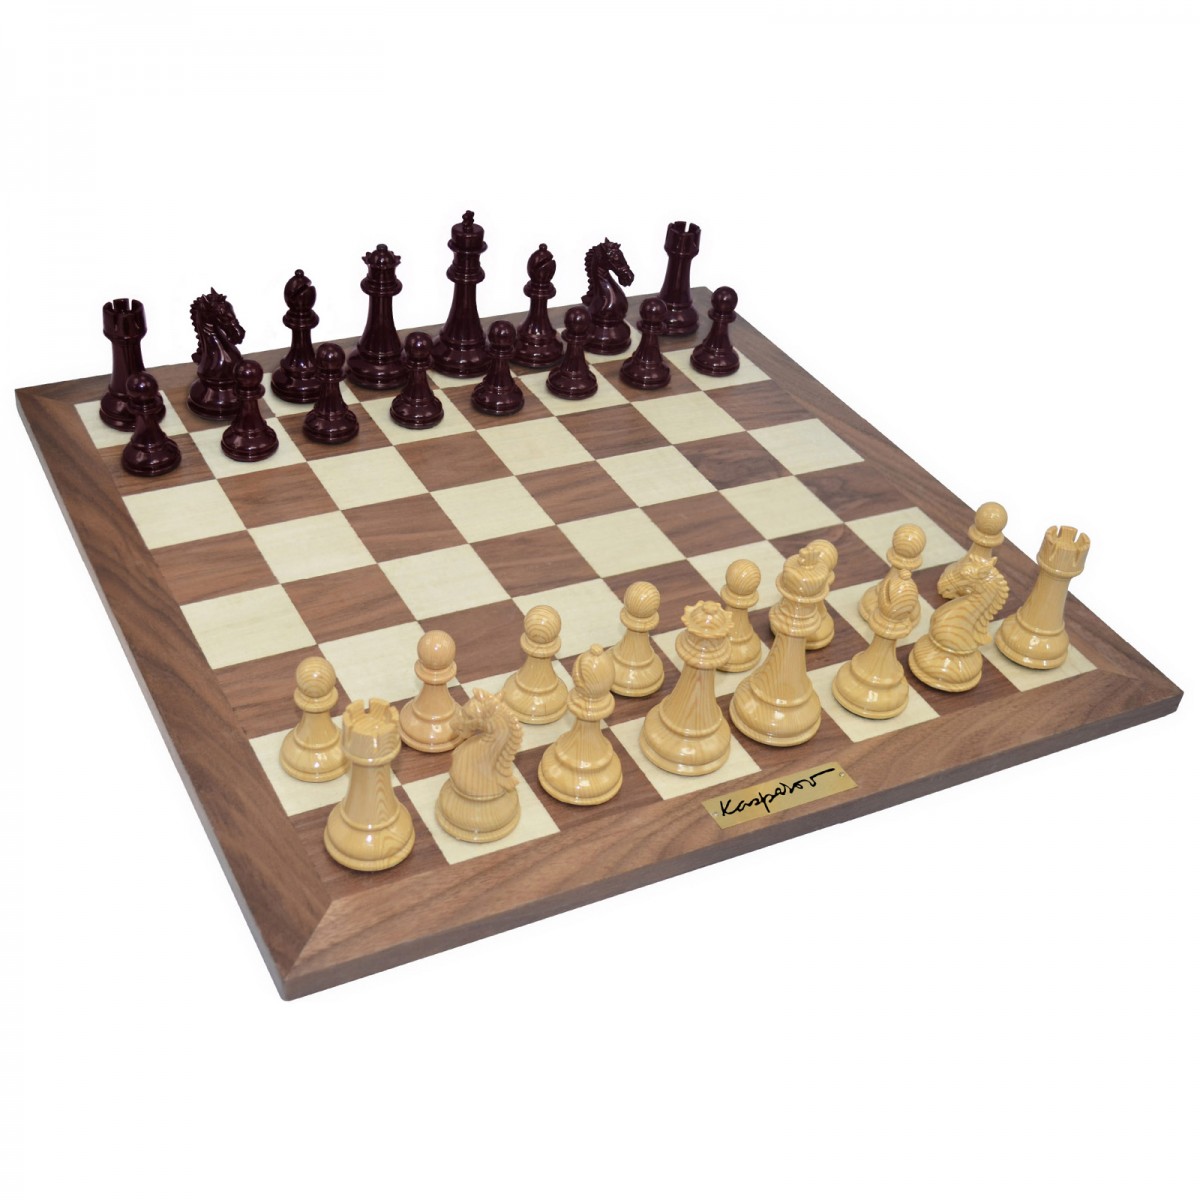 earn-at-chess-with-these-special-goes-object-dreams